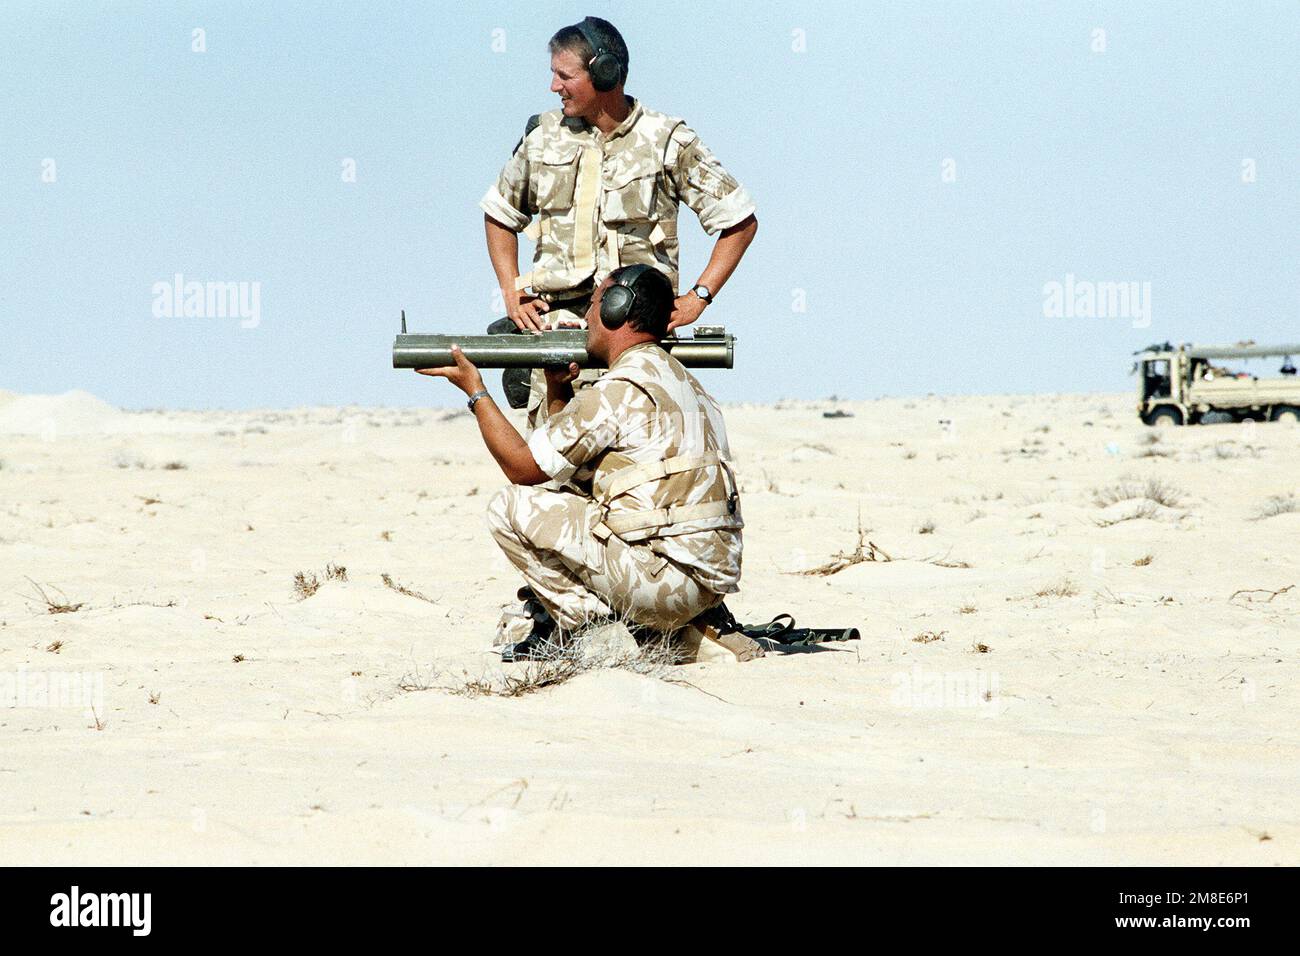 A British Soldier from the Queen's Dragoon Guards prepares to fire an M-72 light anti-tank weapon (LAW) while taking part in weapons training at Abu Hydra Range during Operation Desert Shield. Subject Operation/Series: DESERT SHIELD Country: Saudi Arabia (SAU) Stock Photo